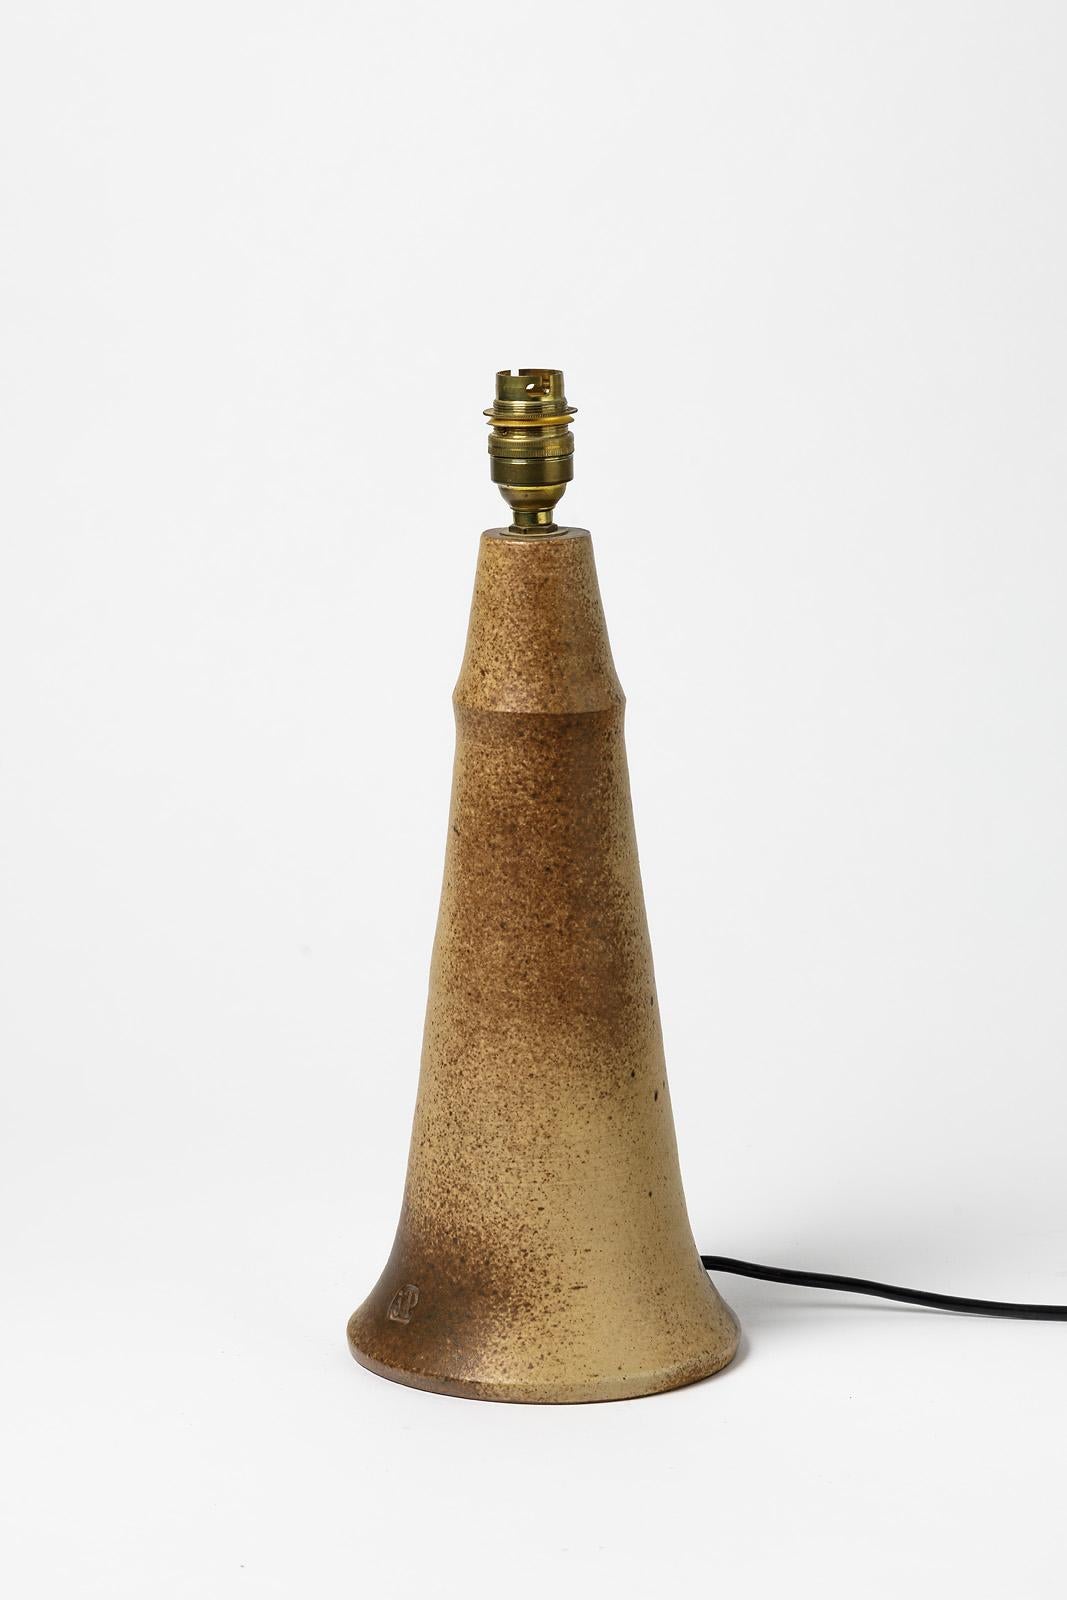 Jean-Jacques Prolongeau

Mid-20th century lighting design ceramic table lamp by the French artist.

Elegant and decorative freeform and brown ceramic color.

Signed at the base

Original perfect conditions

Sold without